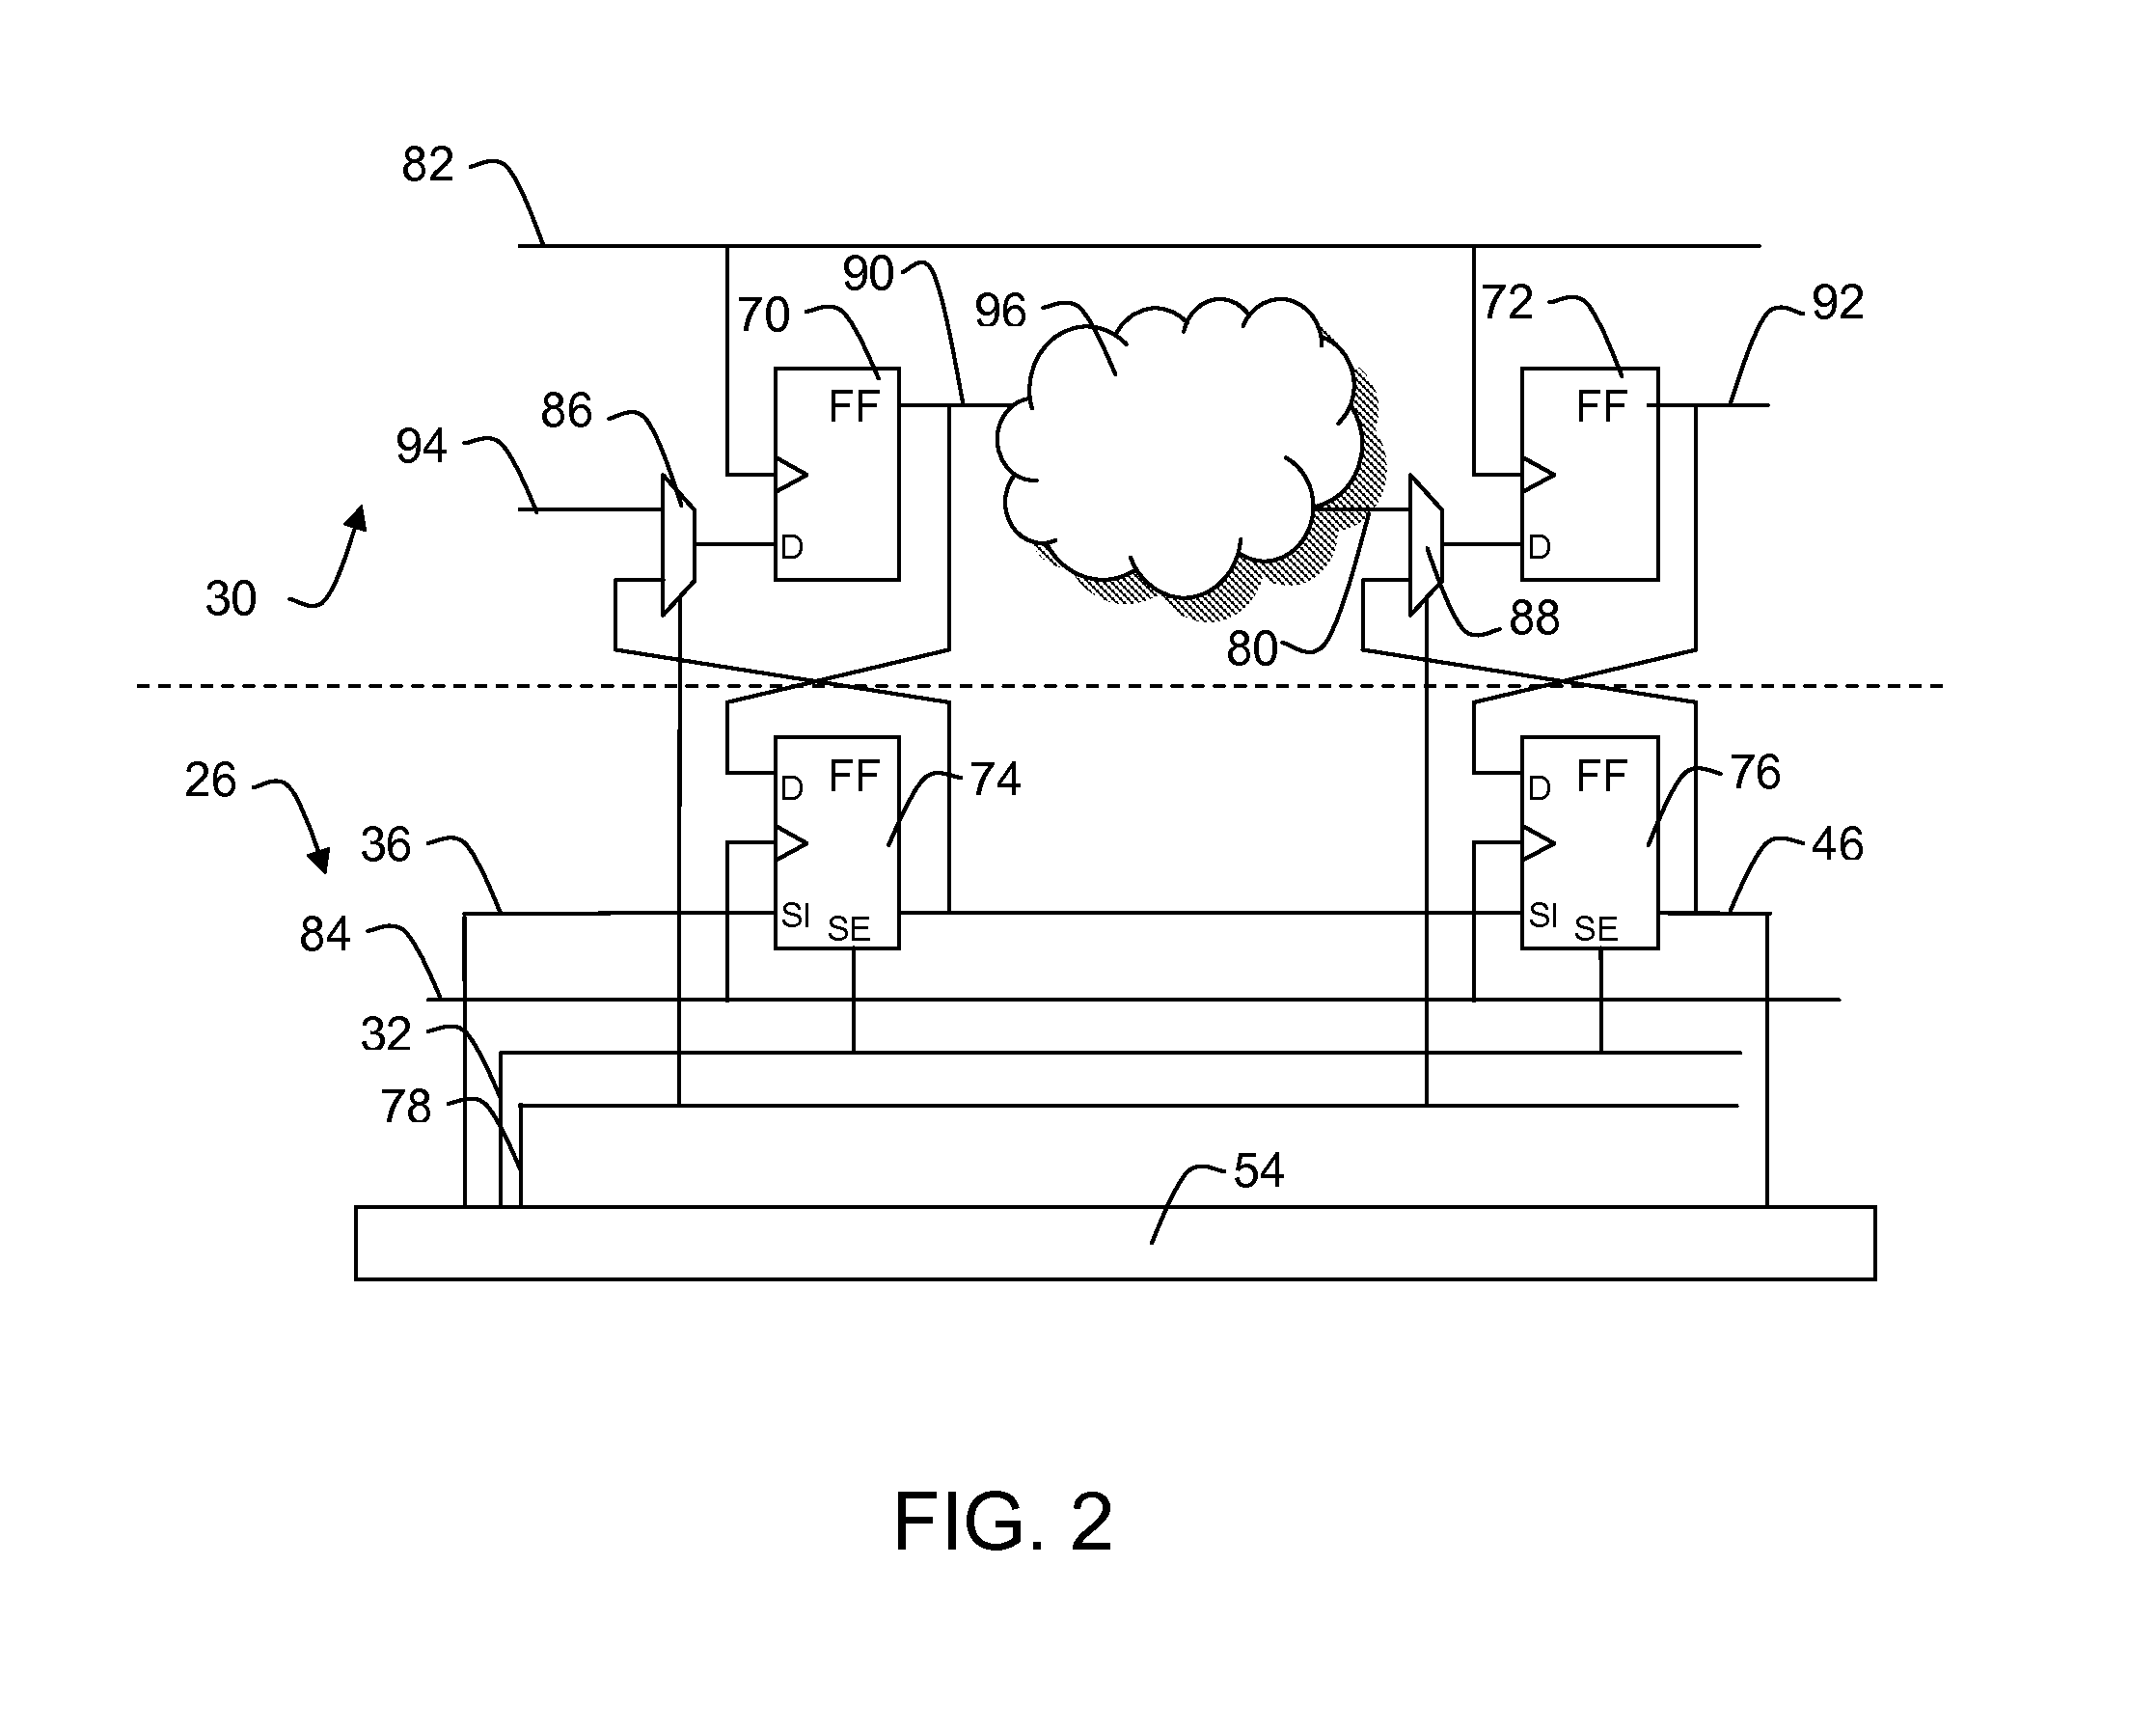 Logic built-in self-test system and method for applying a logic built-in self-test to a device under test